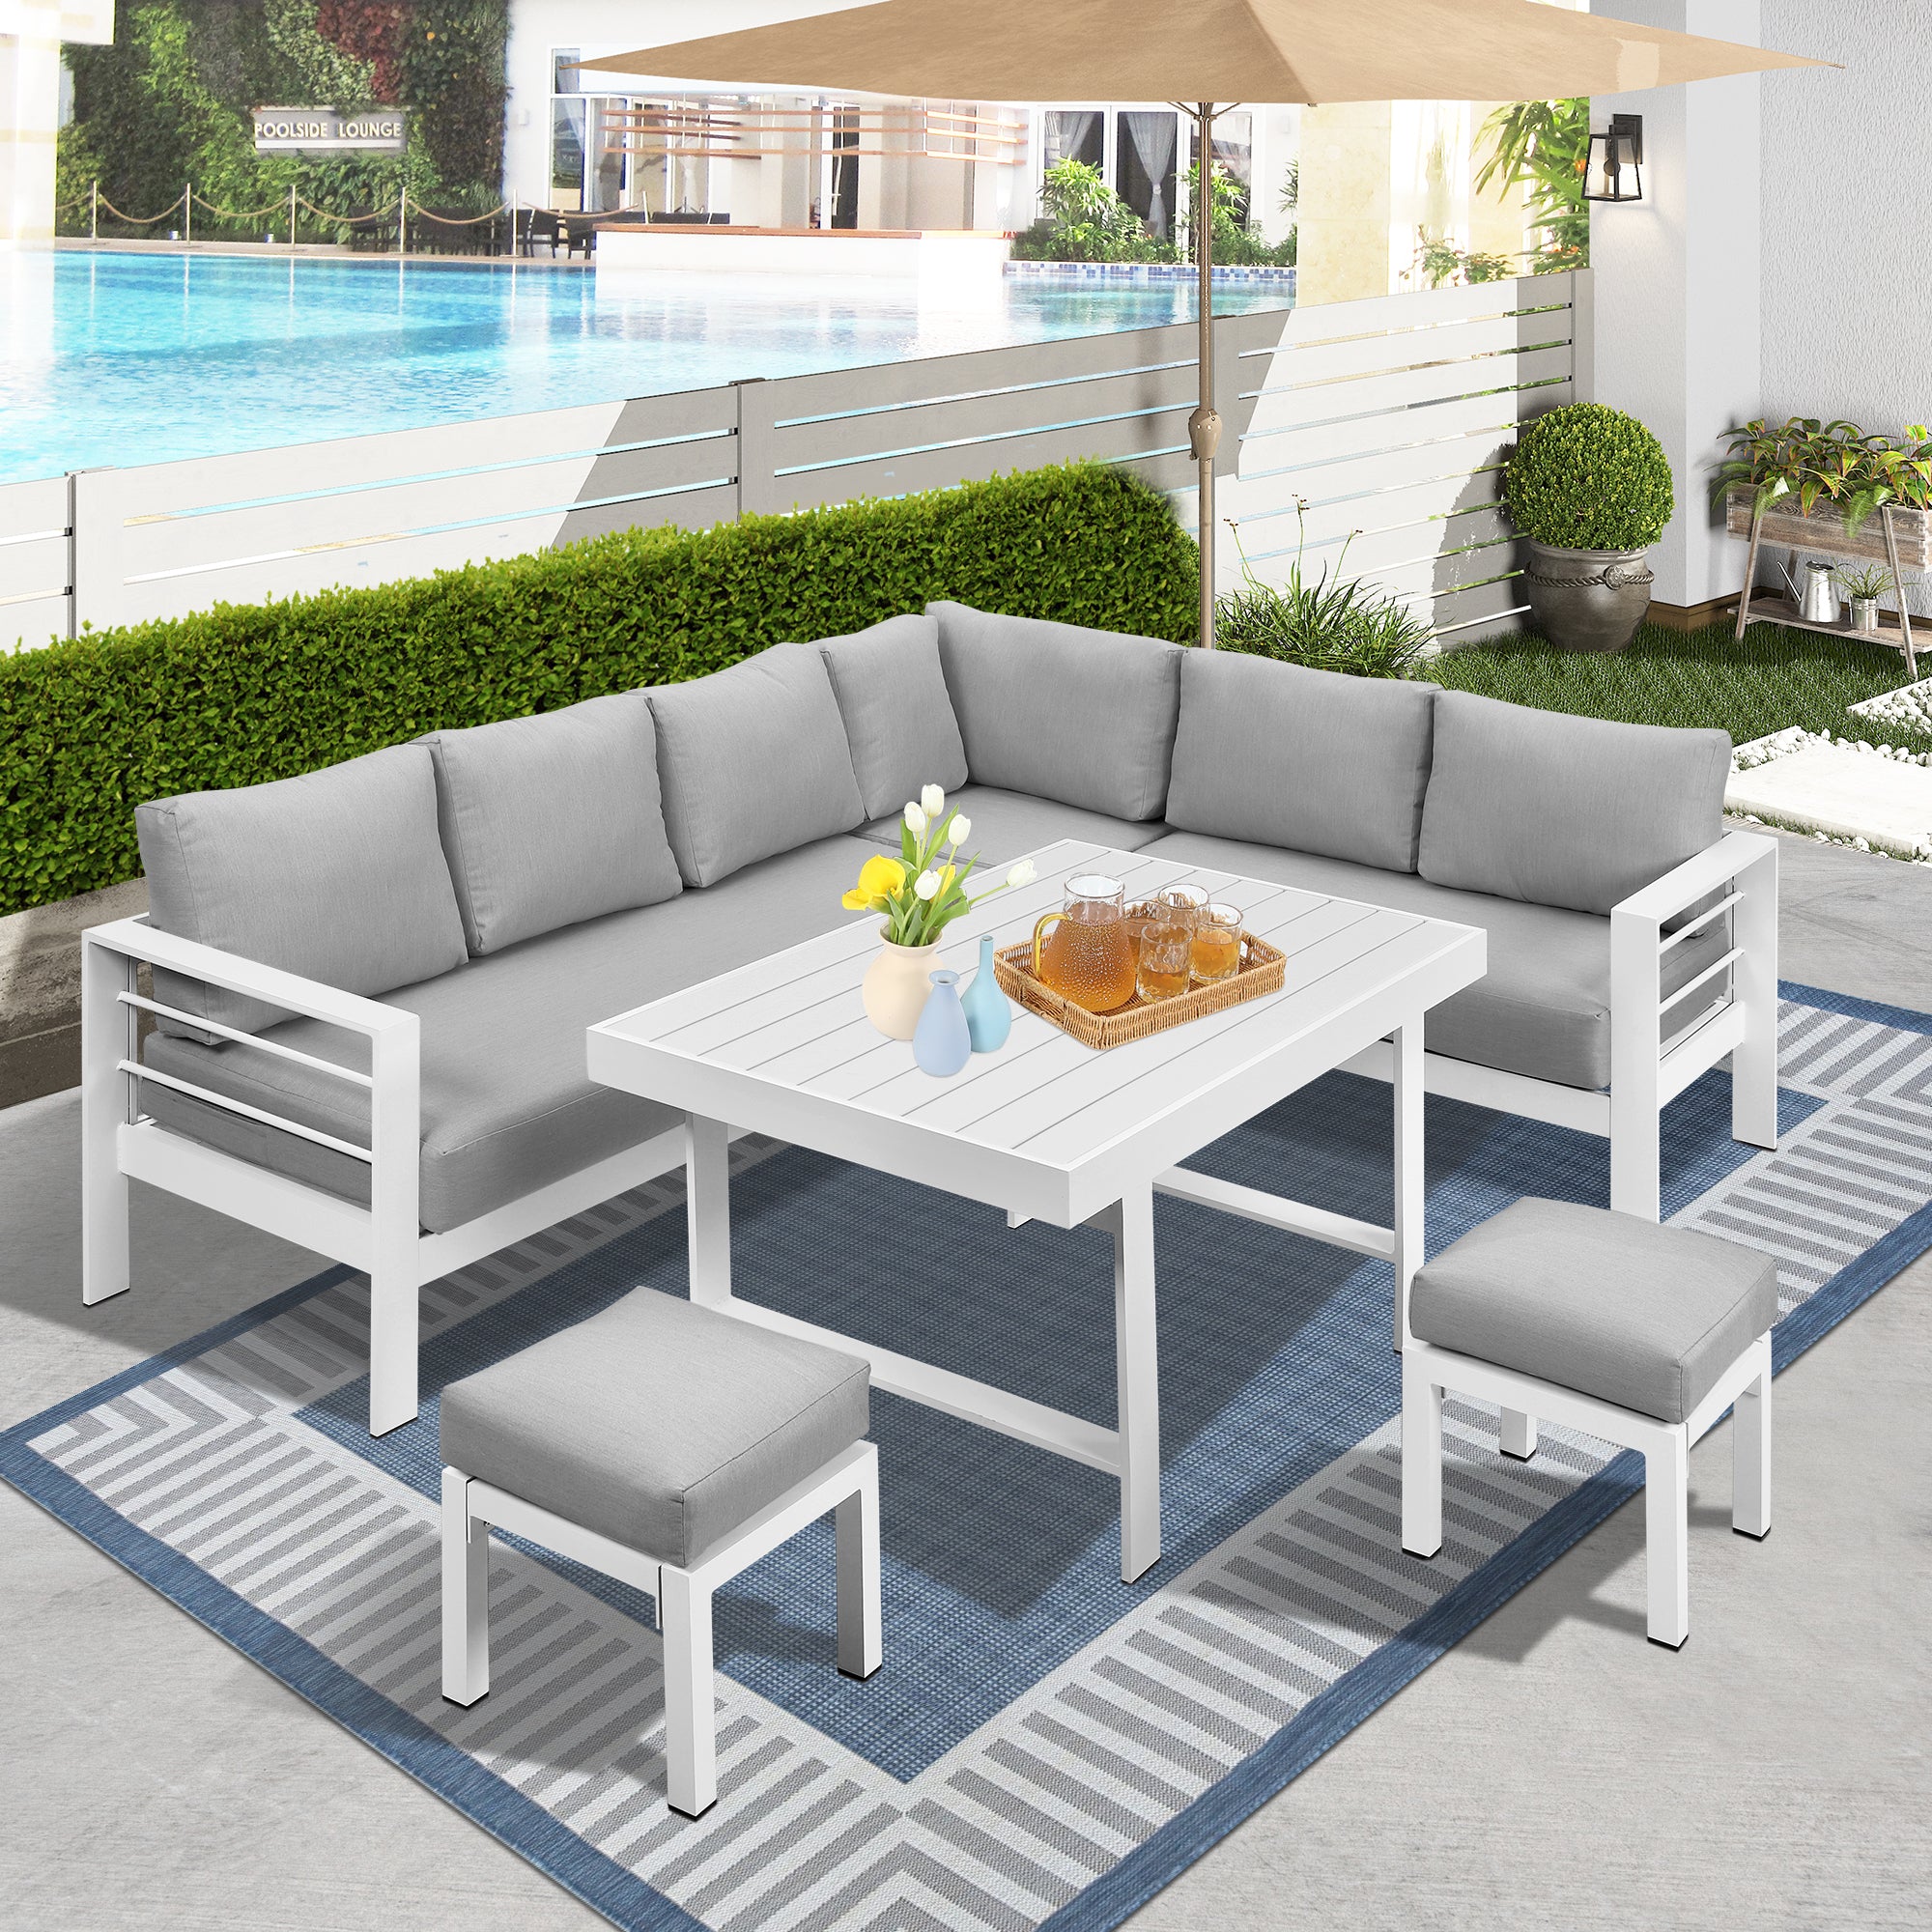 6-Pieces-Outdoor-Dining-Set,-White-Aluminum-Frame-with-Light-Grey-Cushions-Outdoor-Furniture-Sets